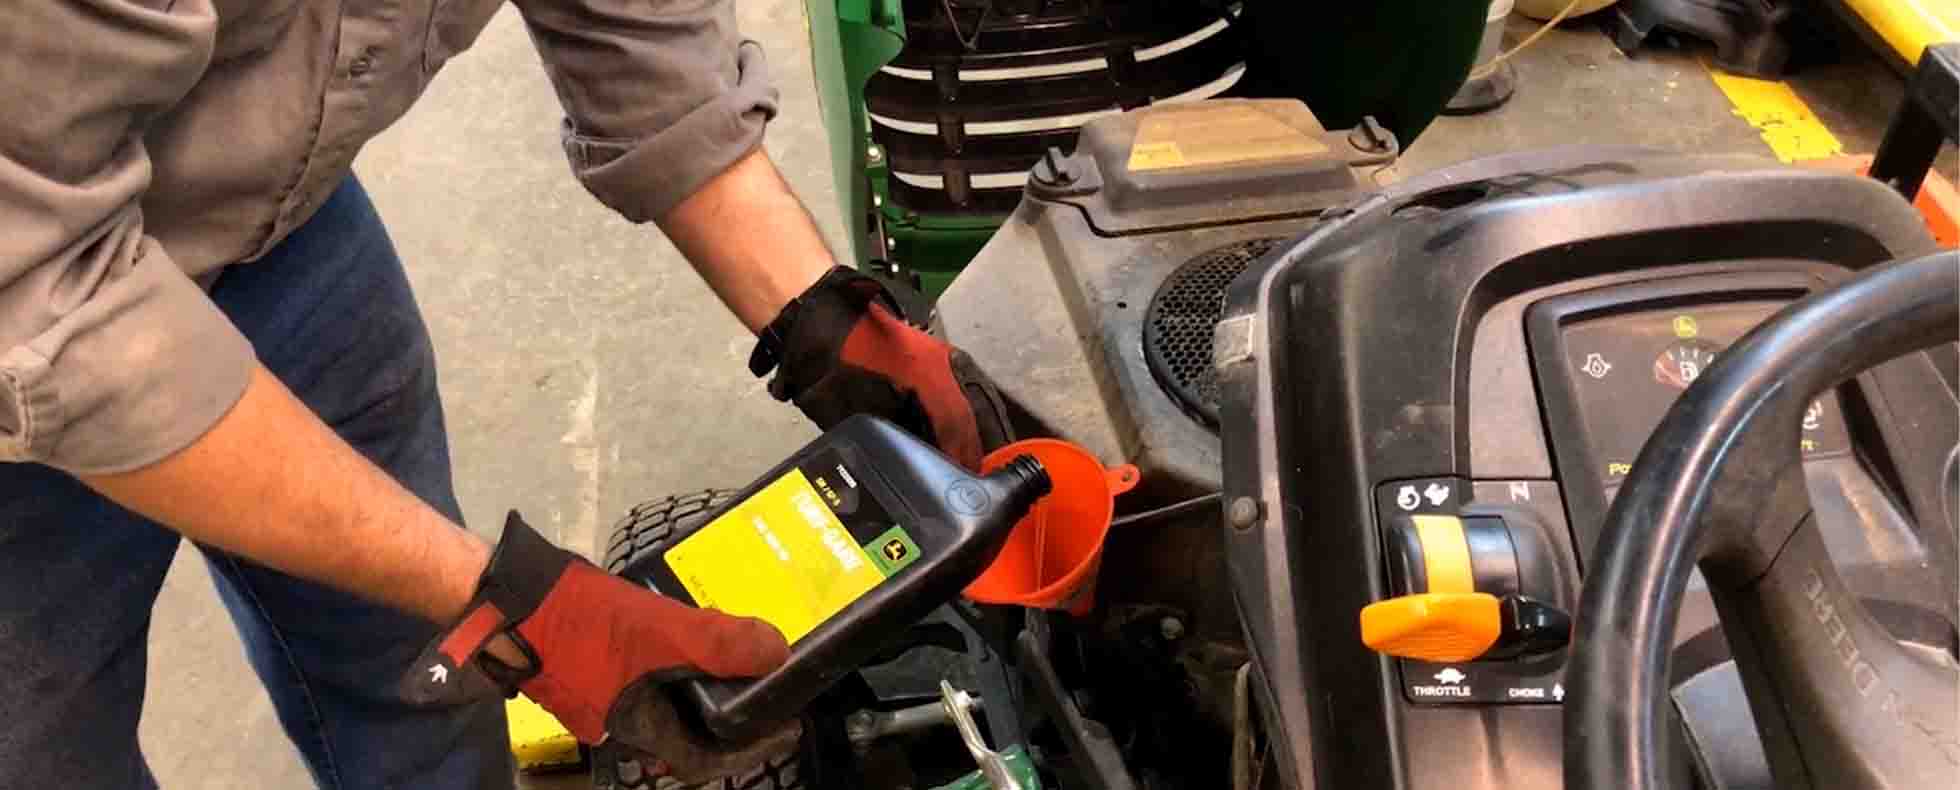 John Deere Mower Maintenance 101: 5 Simple Steps to Keep Your Machine in Top Condition